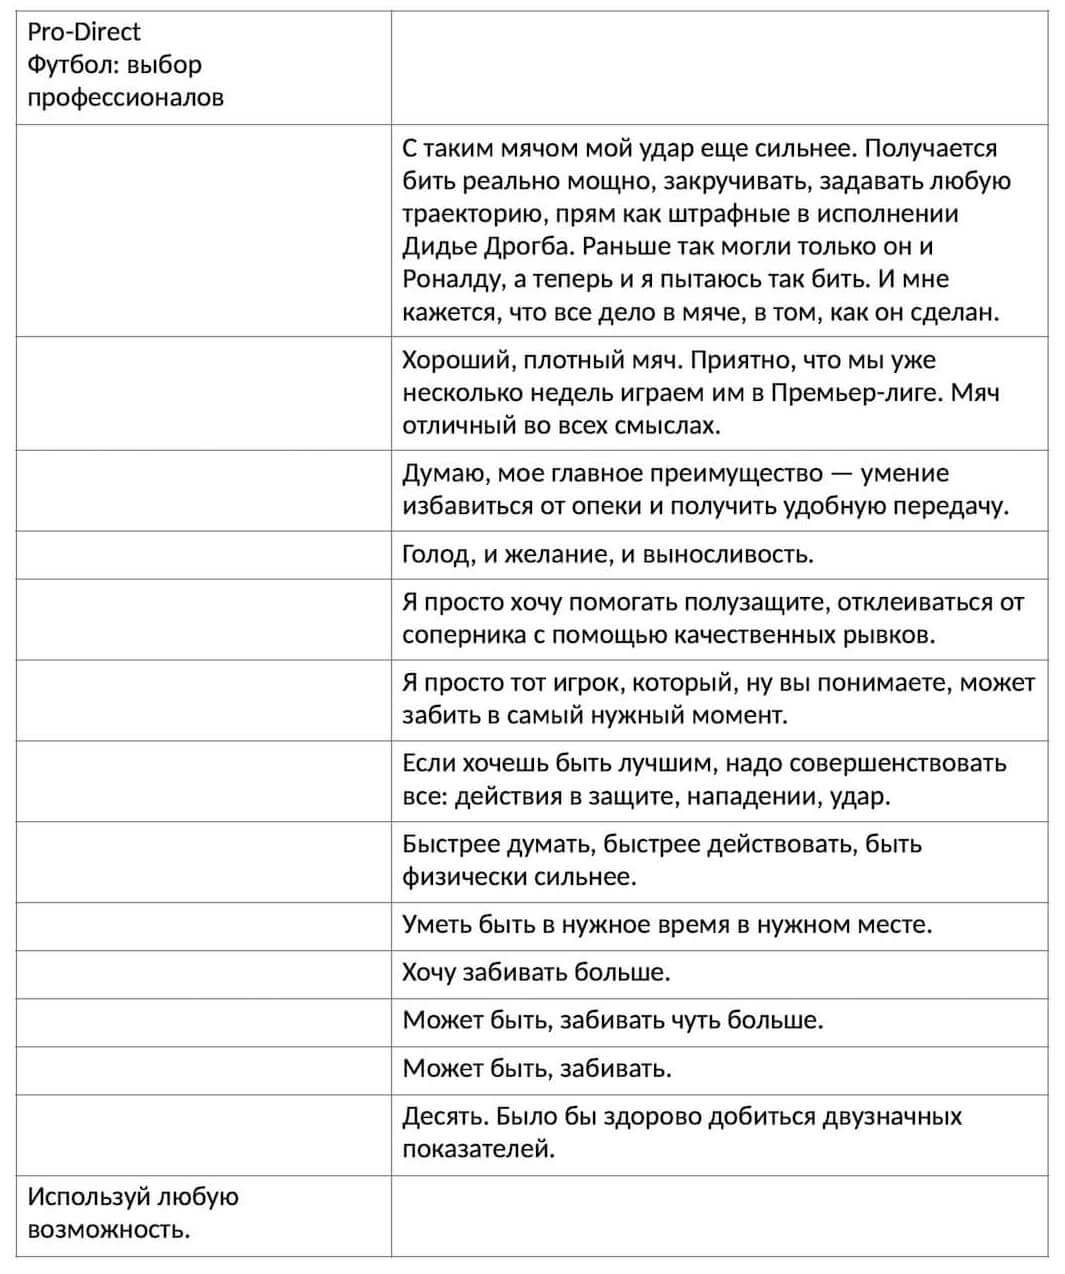 Basic video translation into Russian example